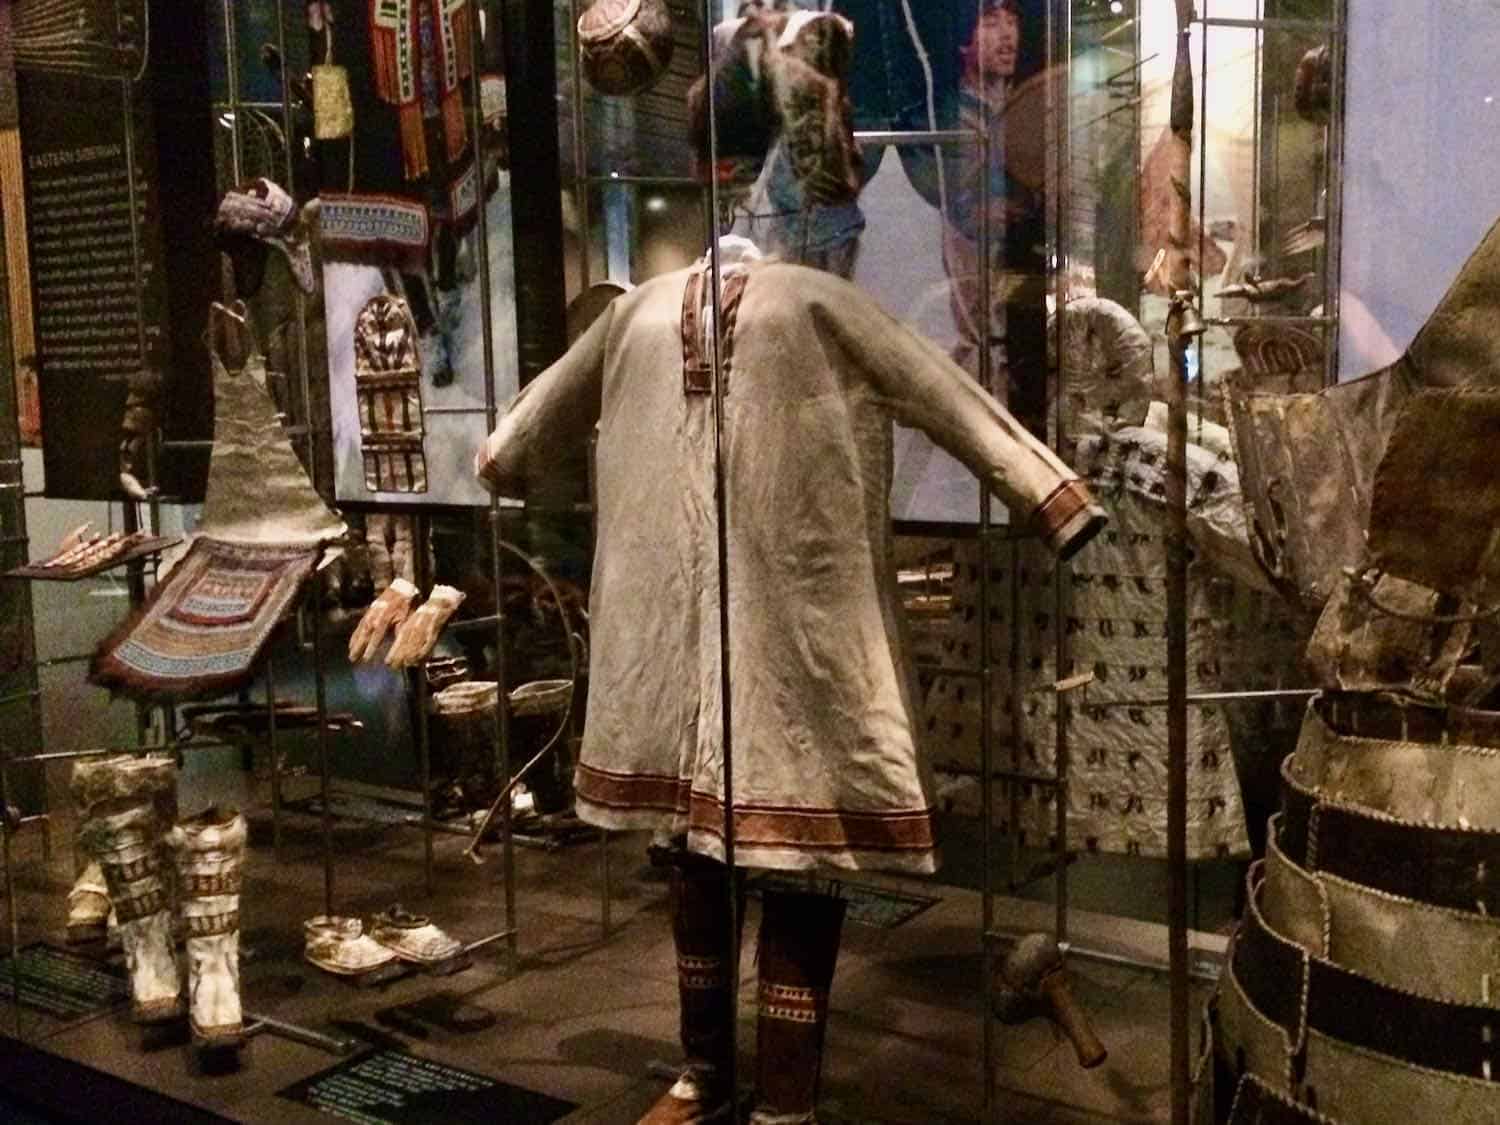 Museum display containing clothing, boots, gloves of indigenous people in Alaska